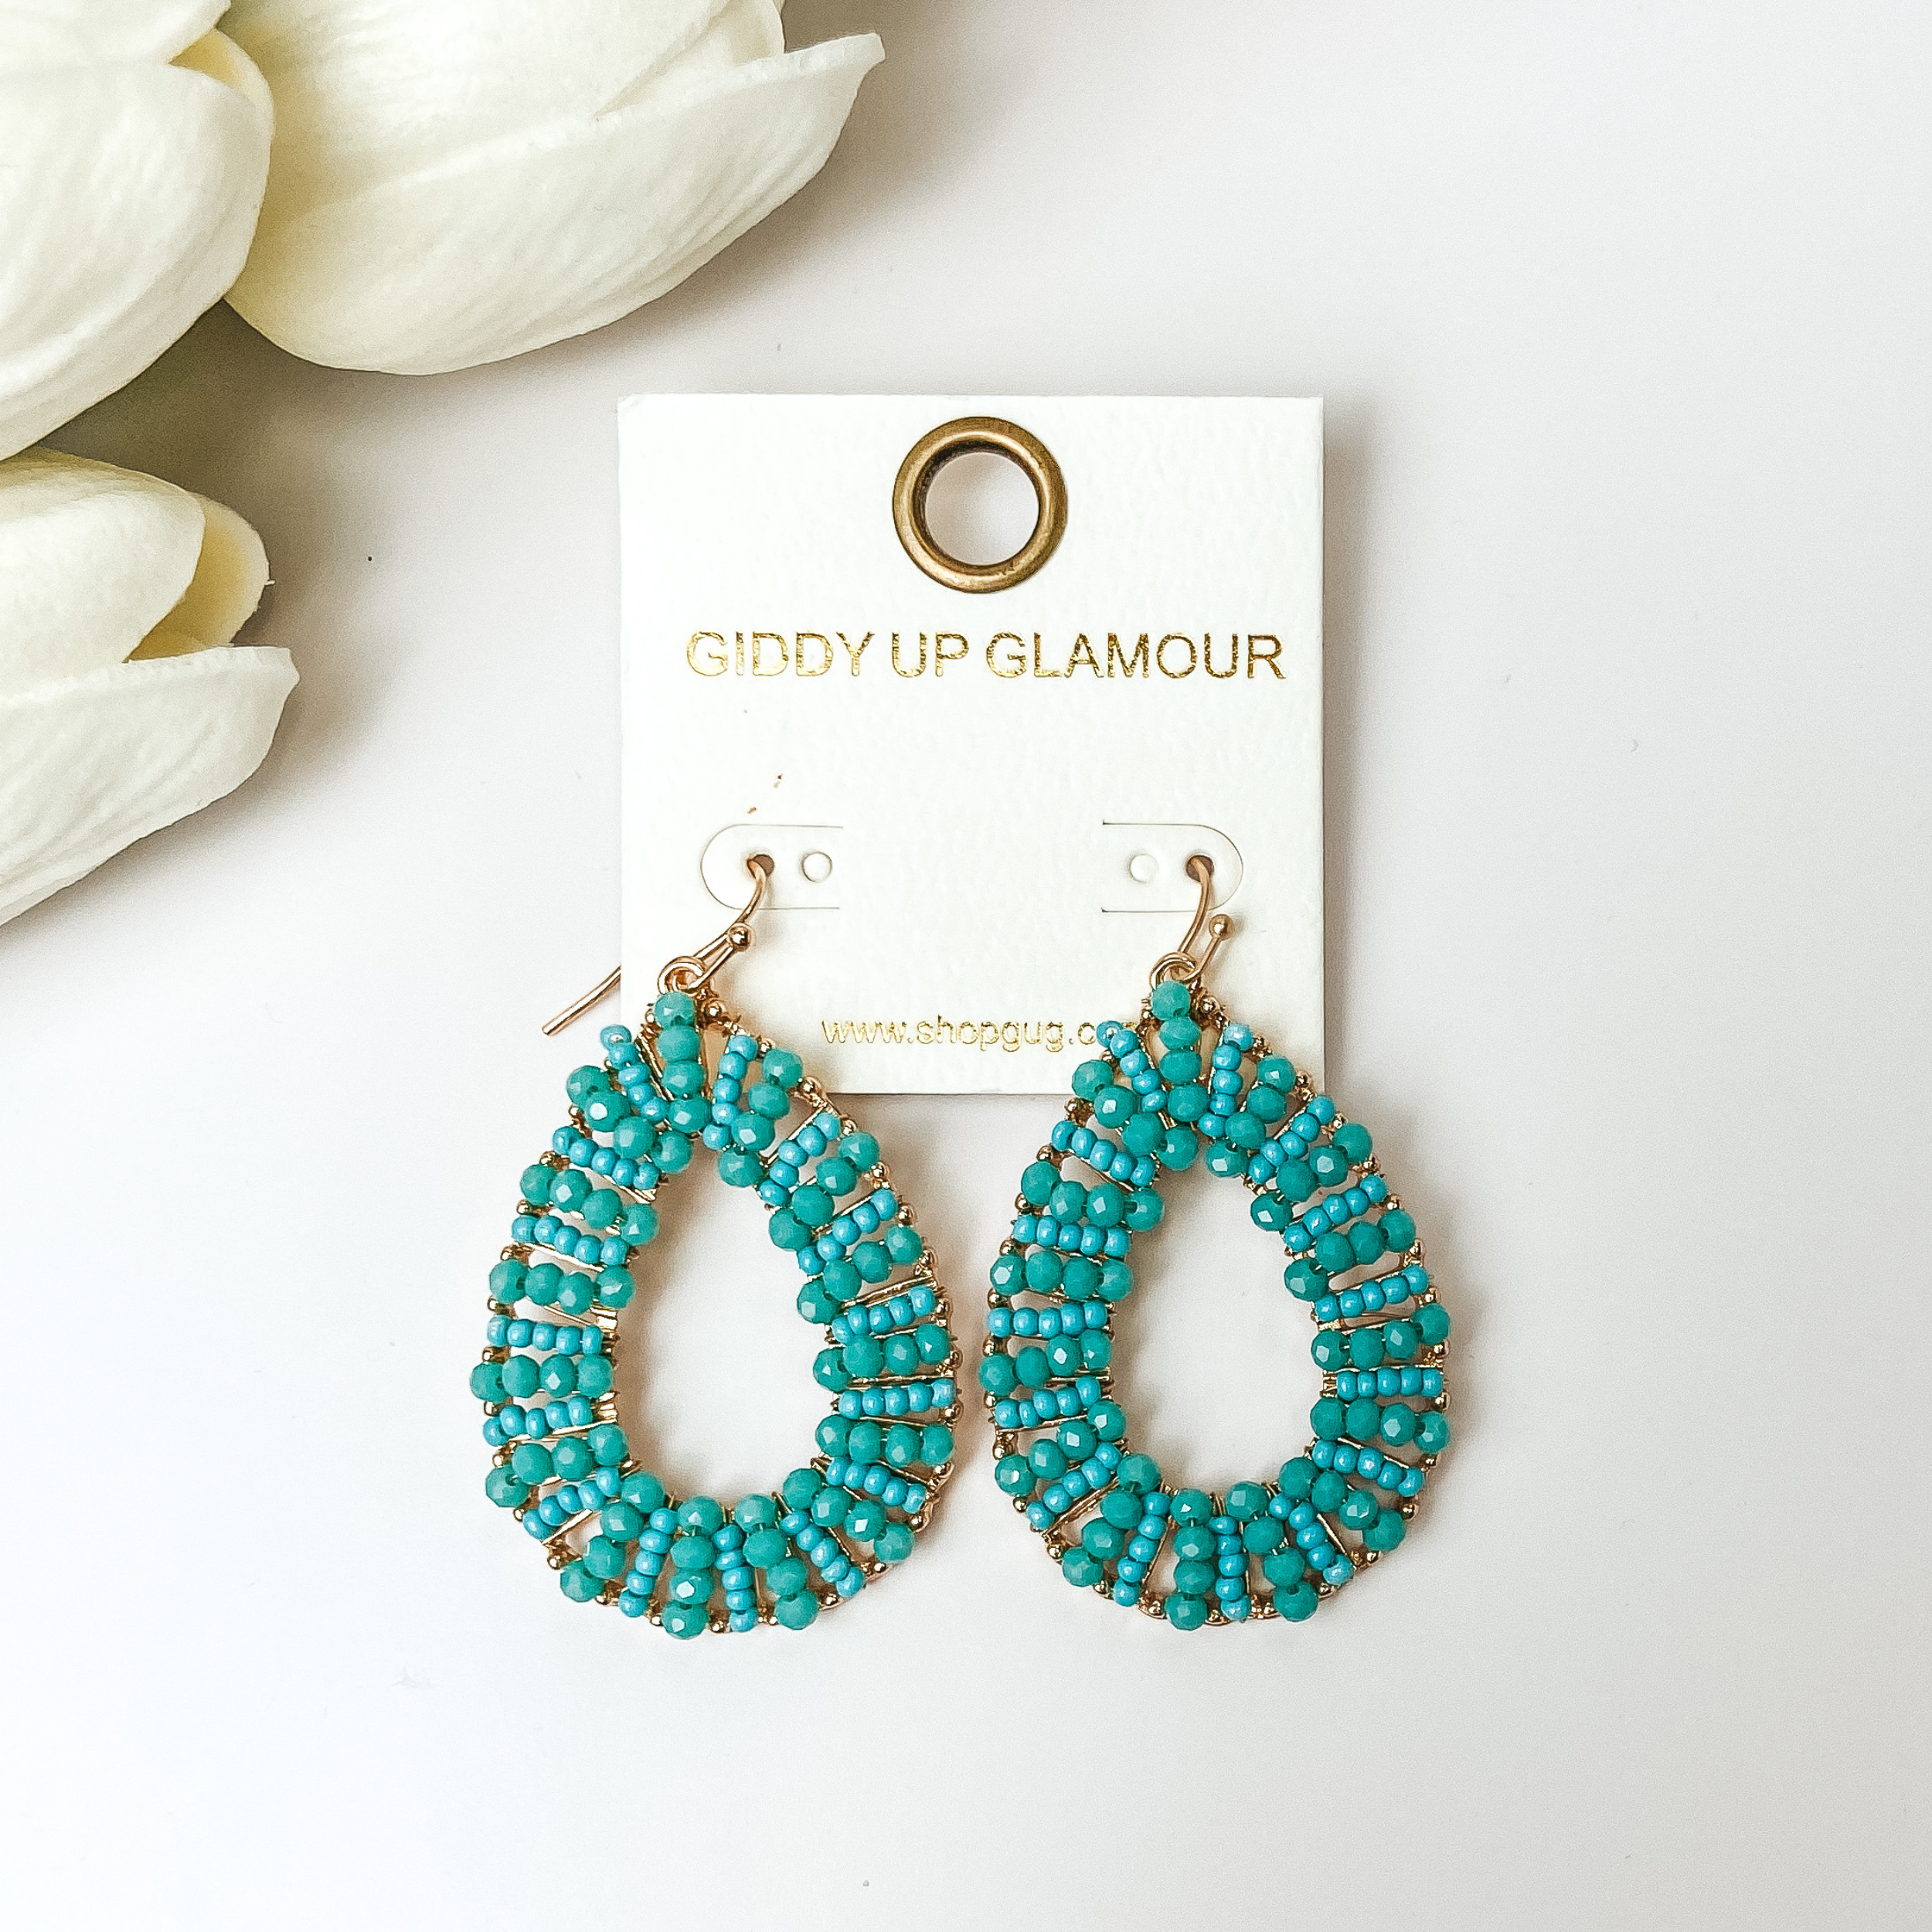 Turquoise Teardrop earrings with gold undertones on a white background with white flowers.